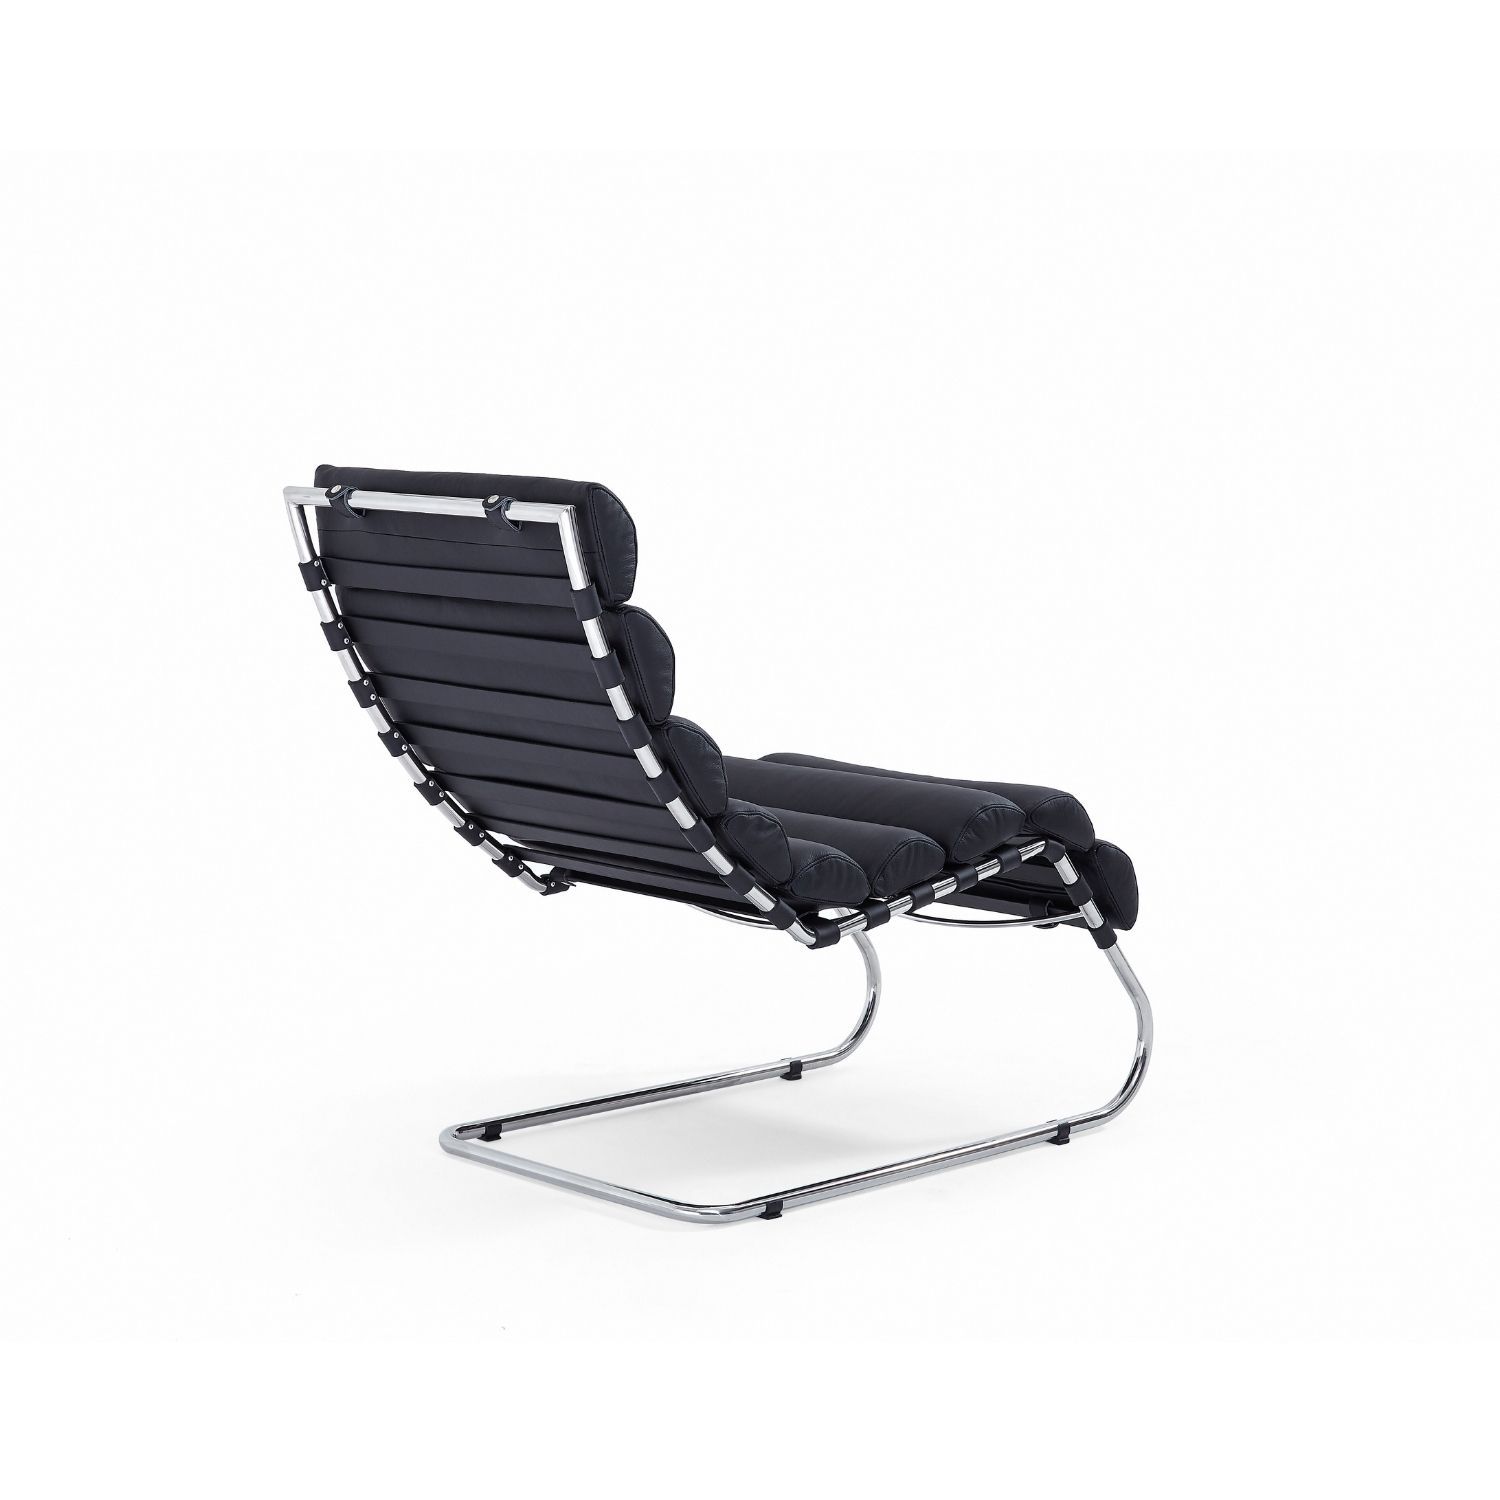 Edward Lounge Chair - Valyou 